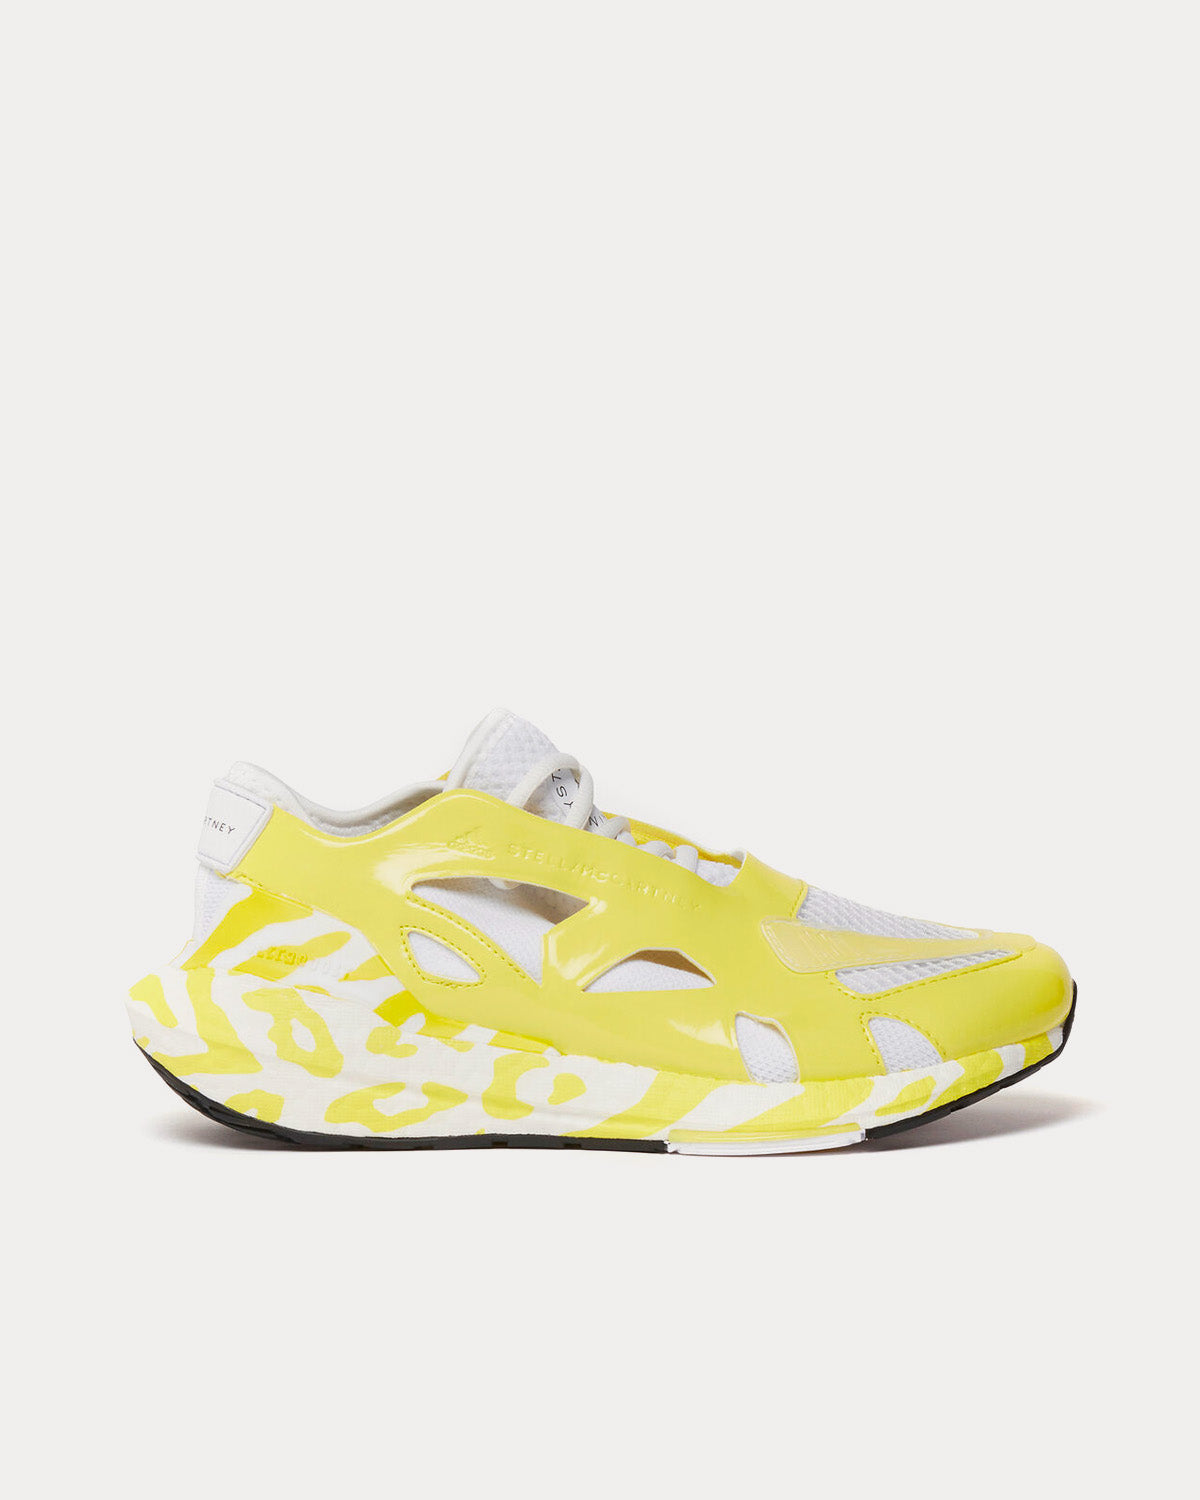 UltraBoost 22 Graphic Shock Yellow / White Running Shoes